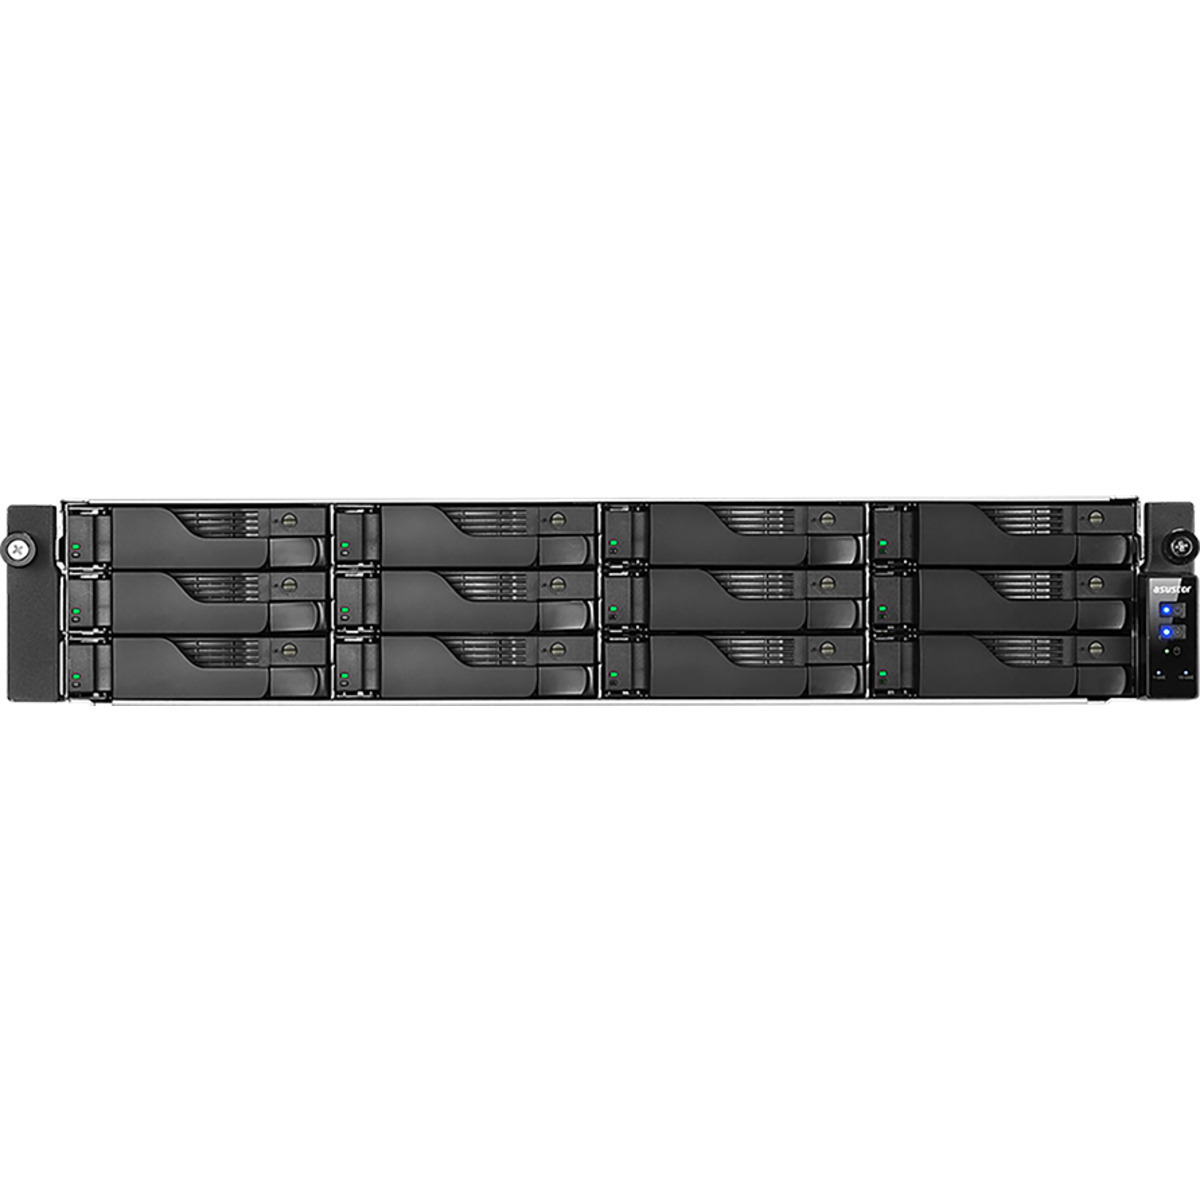 buy ASUSTOR LOCKERSTOR 12RD AS6512RD 72tb RackMount NAS - Network Attached Storage Device 12x6000gb Western Digital Red WD60EFAX 3.5 5400rpm SATA 6Gb/s HDD NAS Class Drives Installed - Burn-In Tested - ON SALE - FREE RAM UPGRADE - nas headquarters buy network attached storage server device das new raid-5 free shipping usa spring sale LOCKERSTOR 12RD AS6512RD